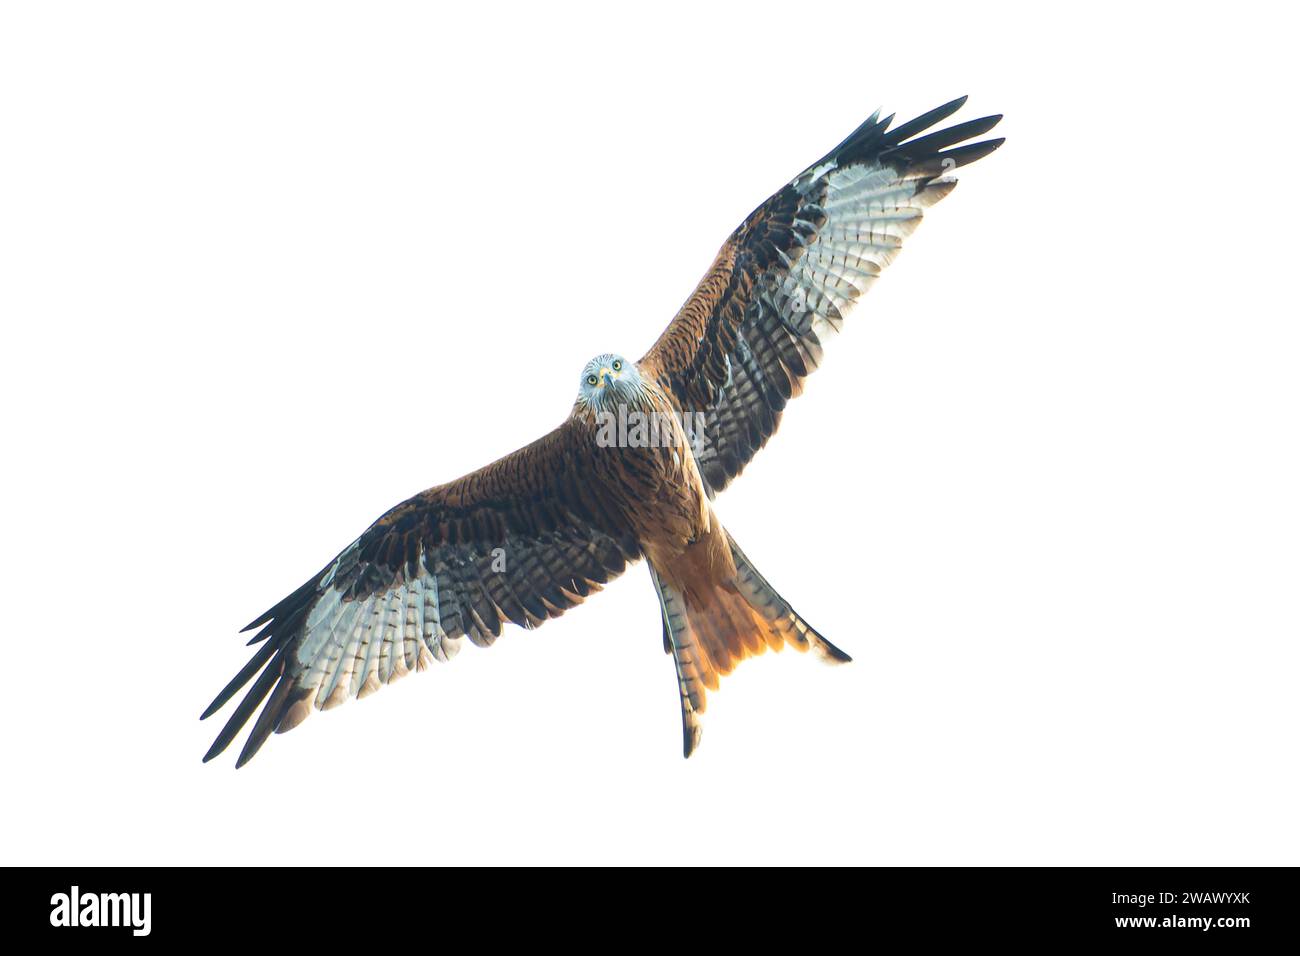 A red kite on the hunt, red kite, Montagu's harrier, king harrier, A bird of prey spreads its wings in flight against the clear sky, Stuttgart Stock Photo